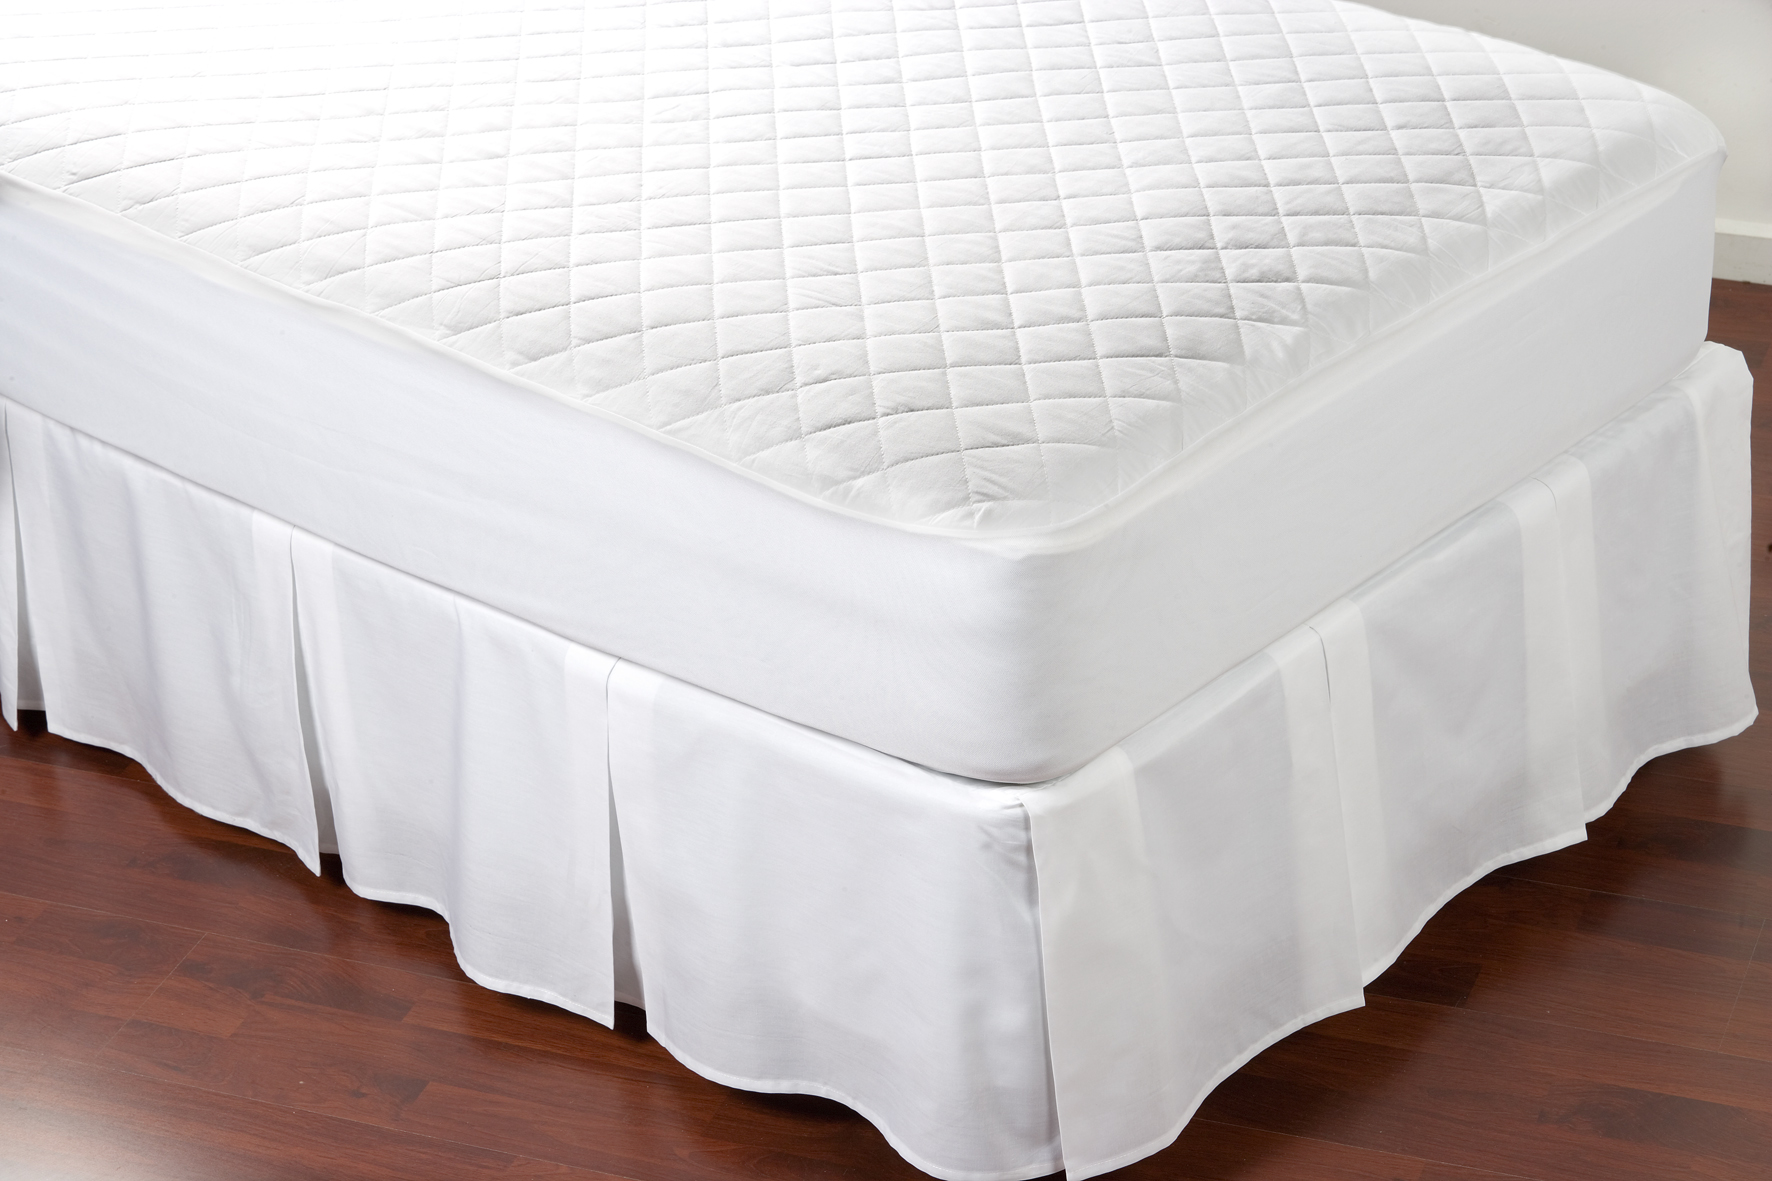 mattress protectors at penney's